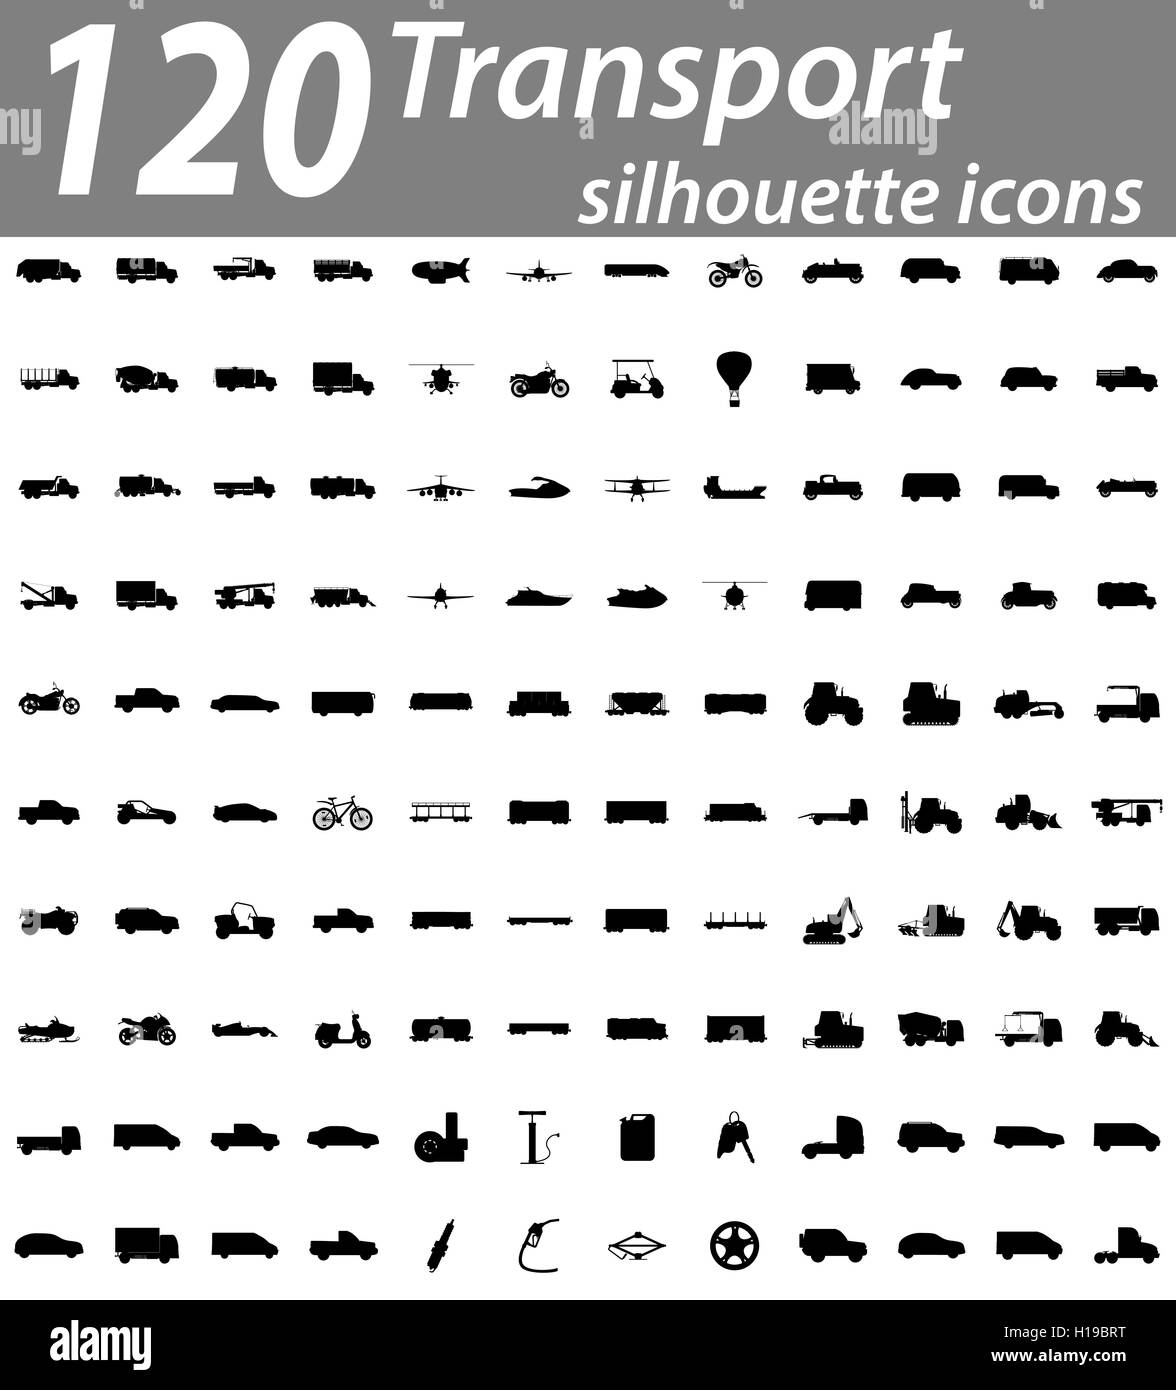 transport silhouette flat icons illustration isolated on background Stock Photo